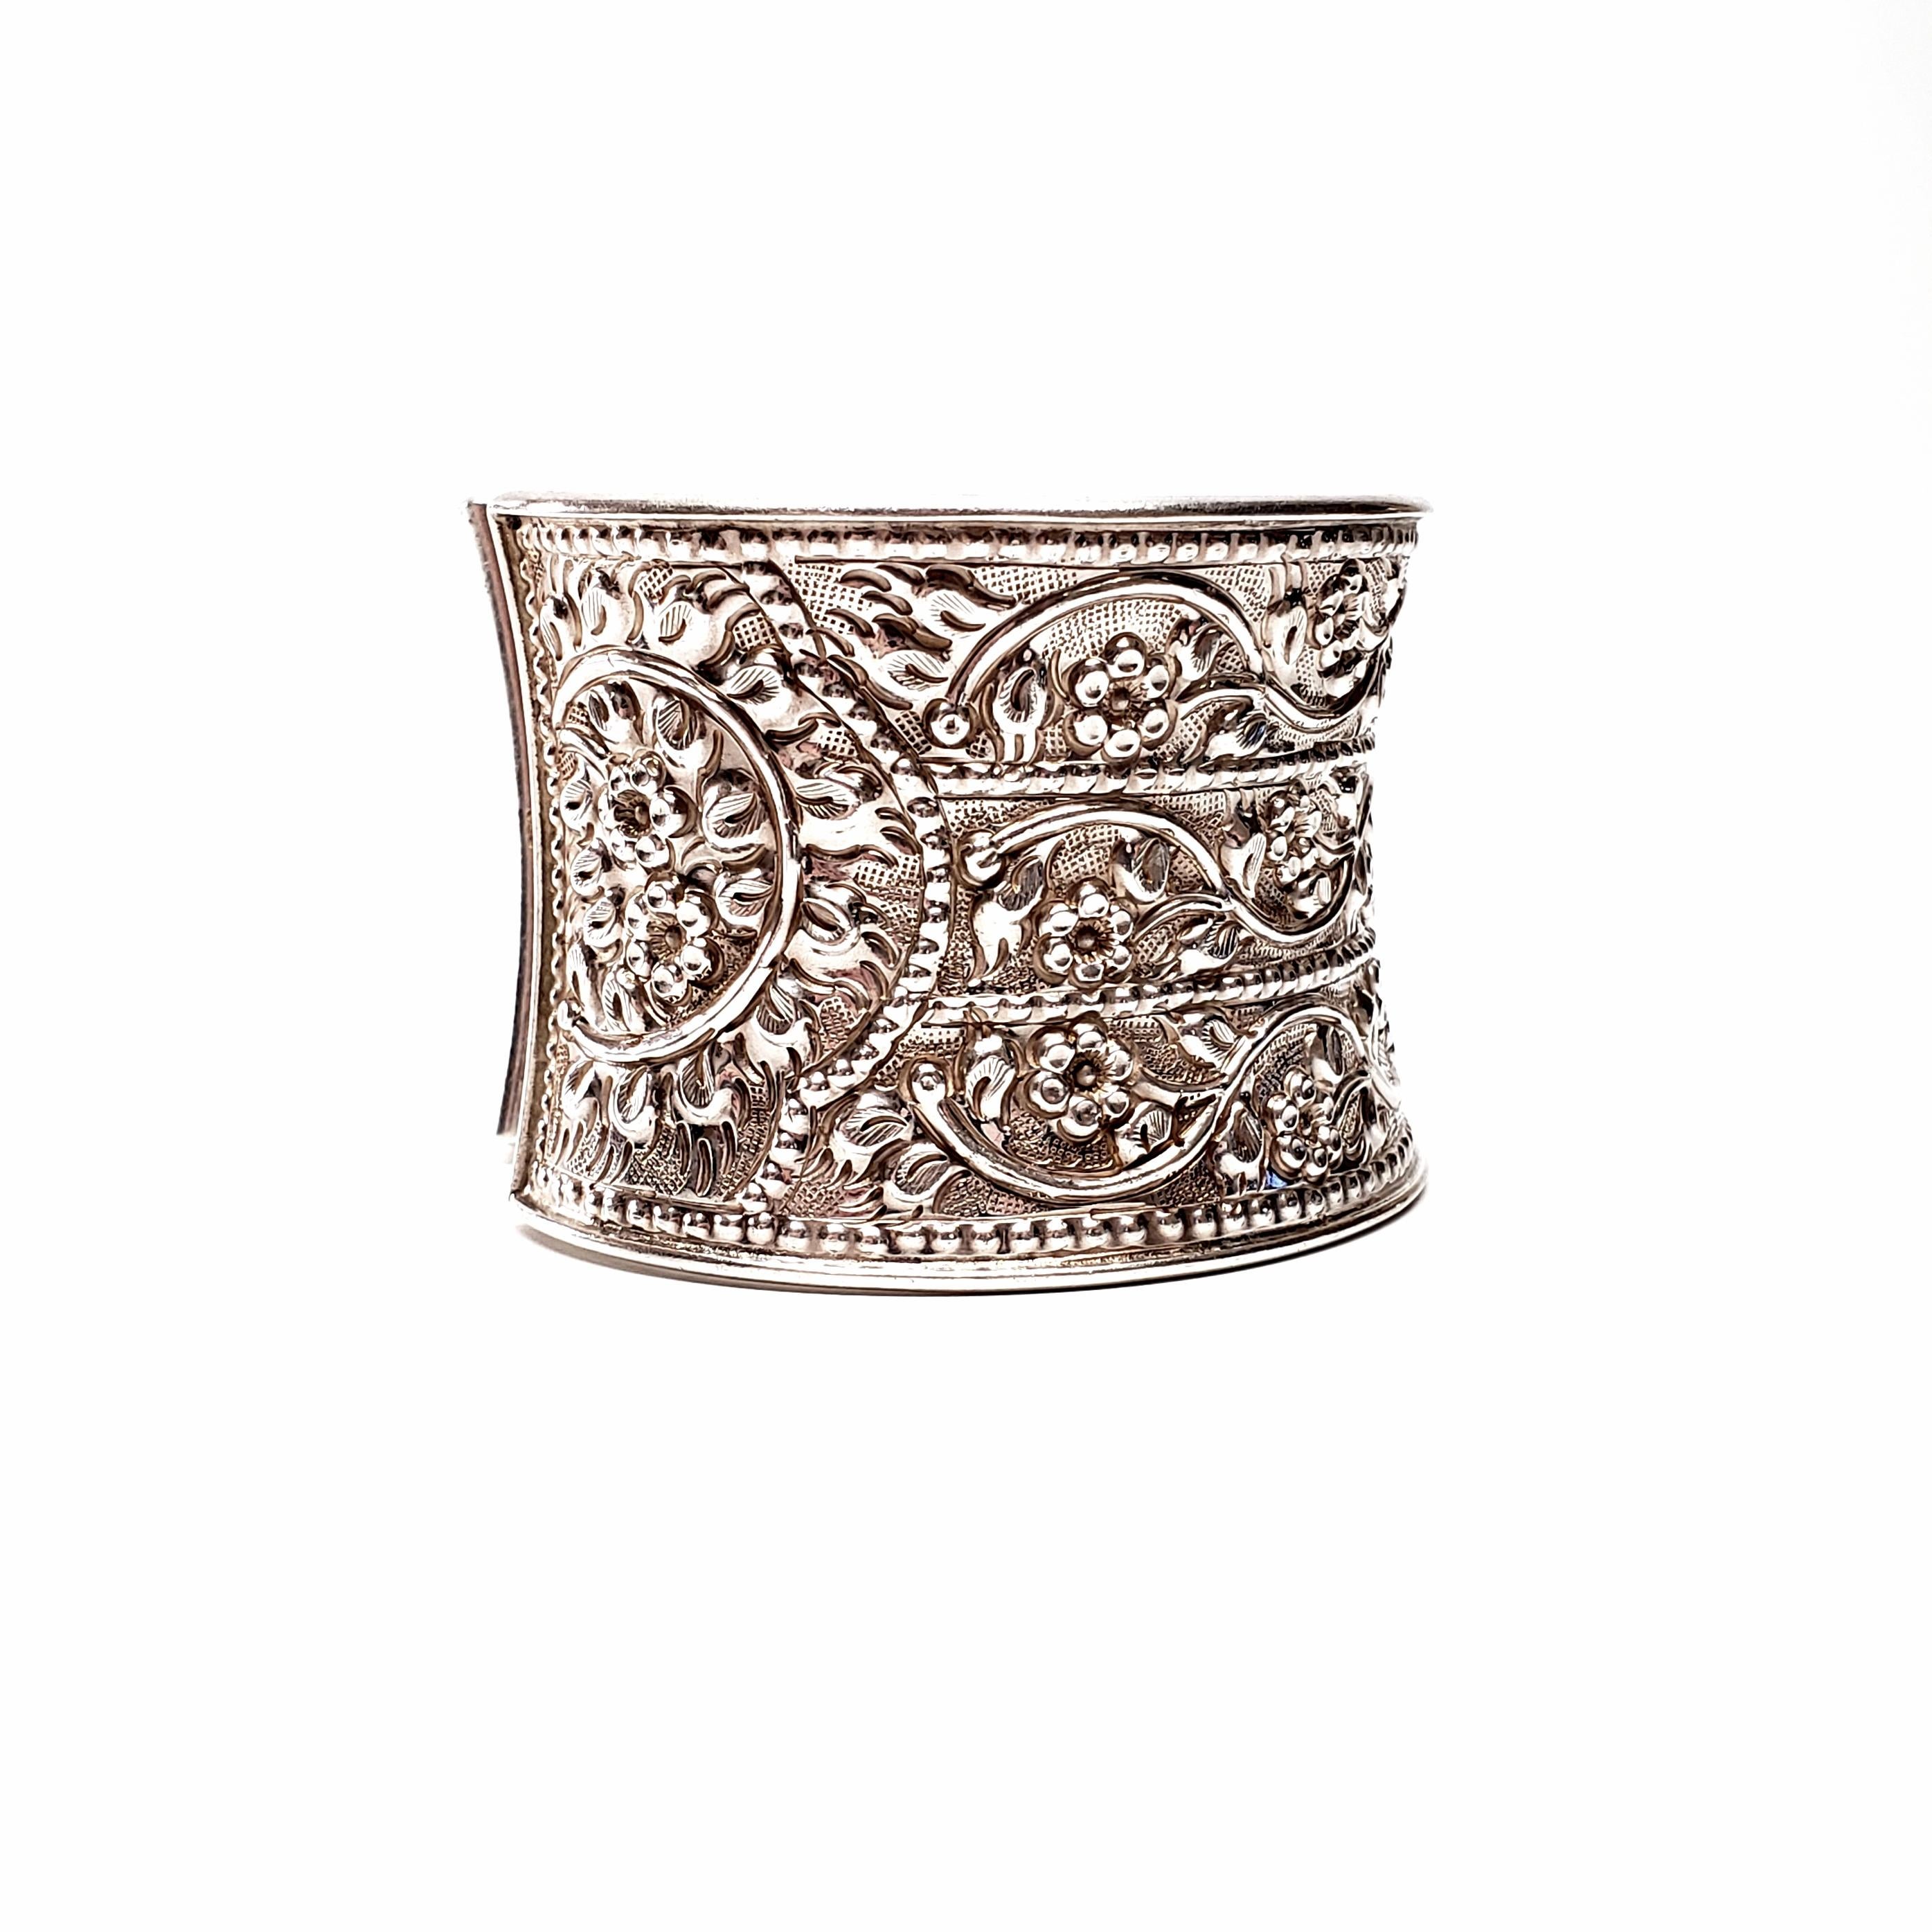 Sterling silver wide floral cuff bracelet designer Samuel Benham (BJC).

Beautiful repousse floral design with beaded and etched accents.

Measures approx 6 1/4